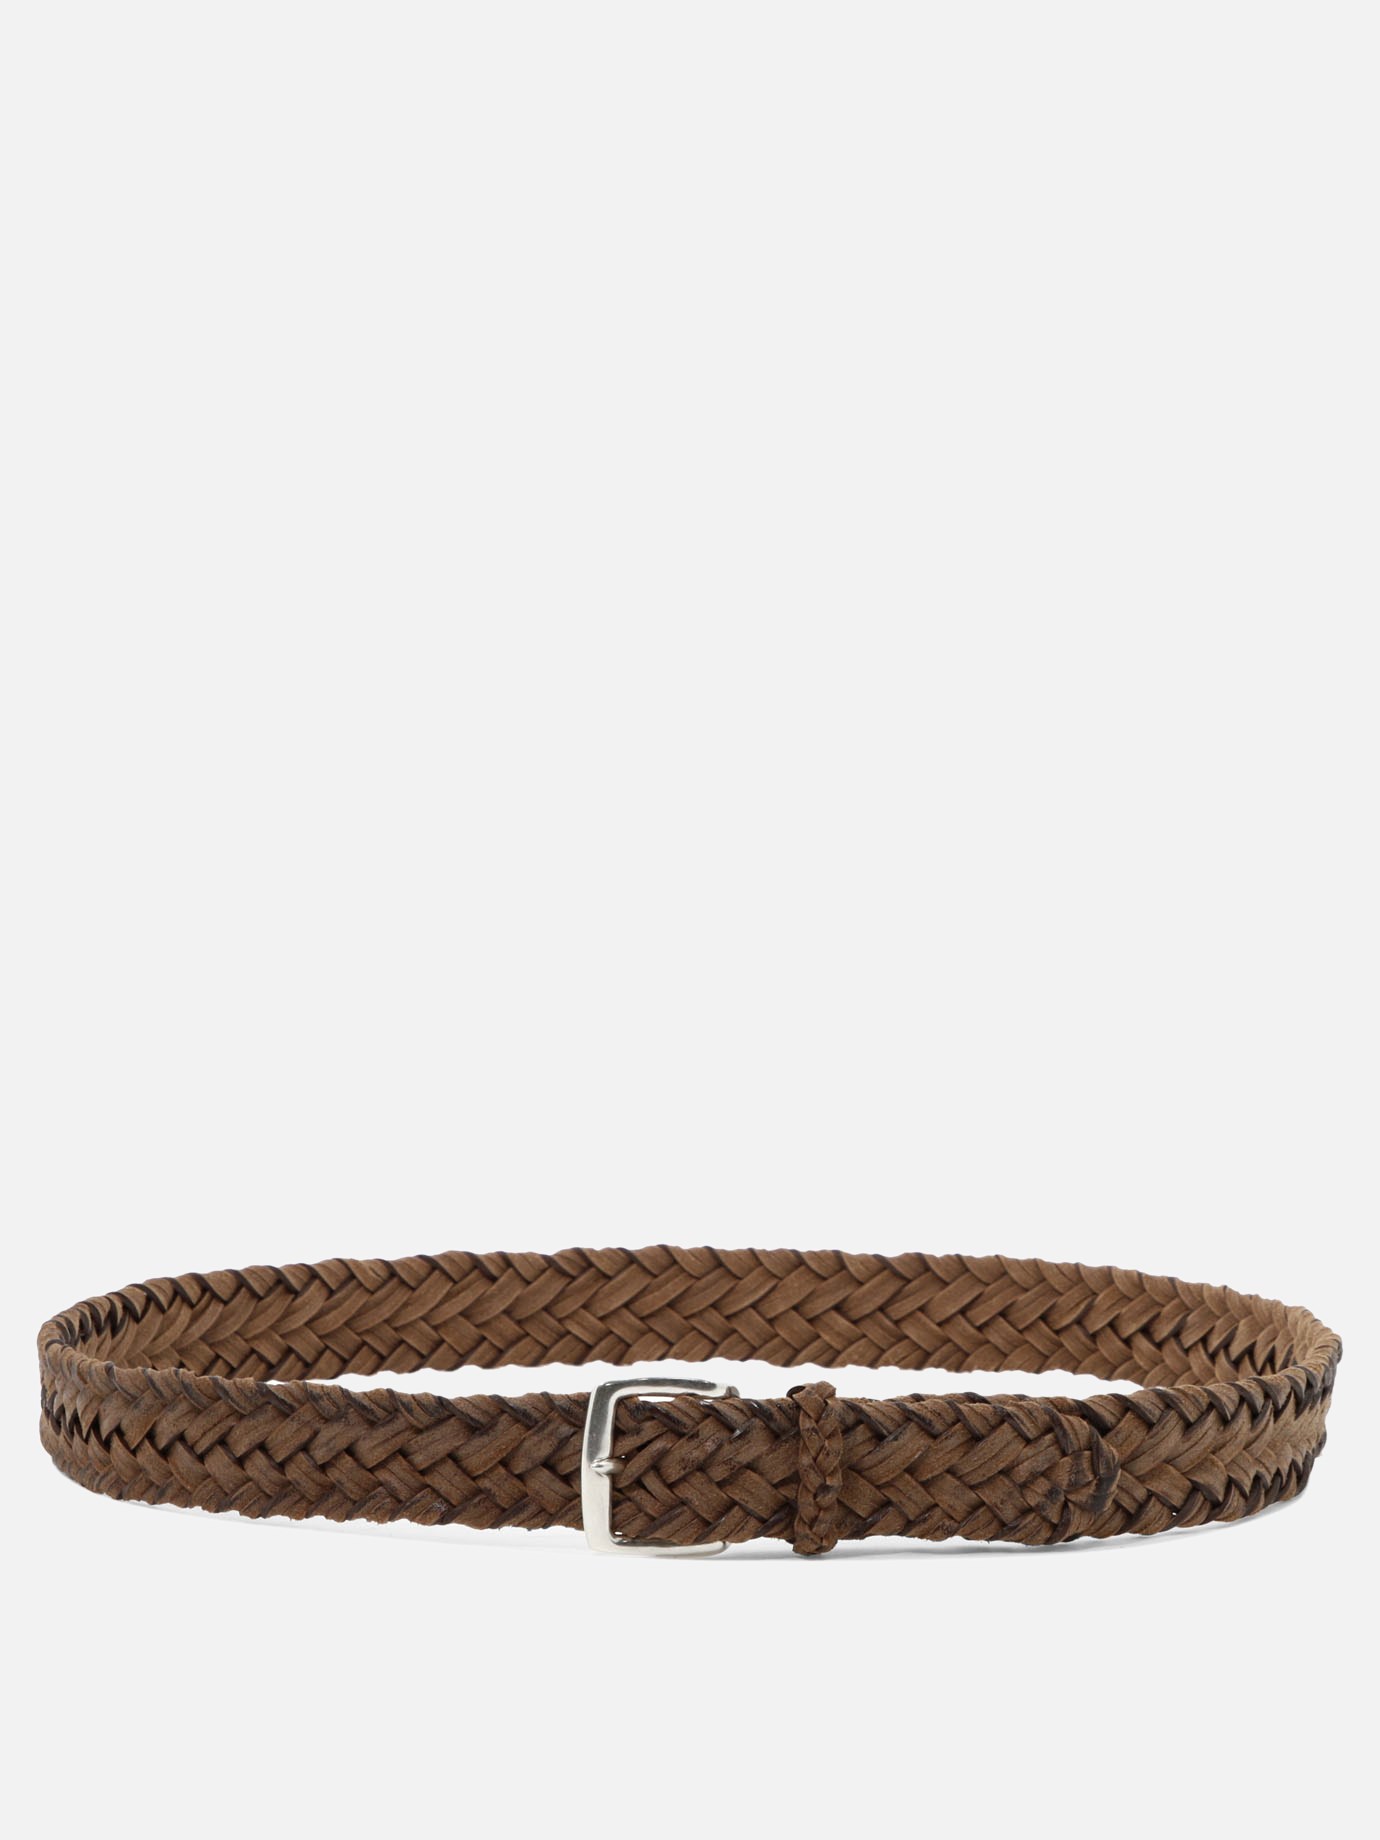 Woven leather beltby Orciani - 5